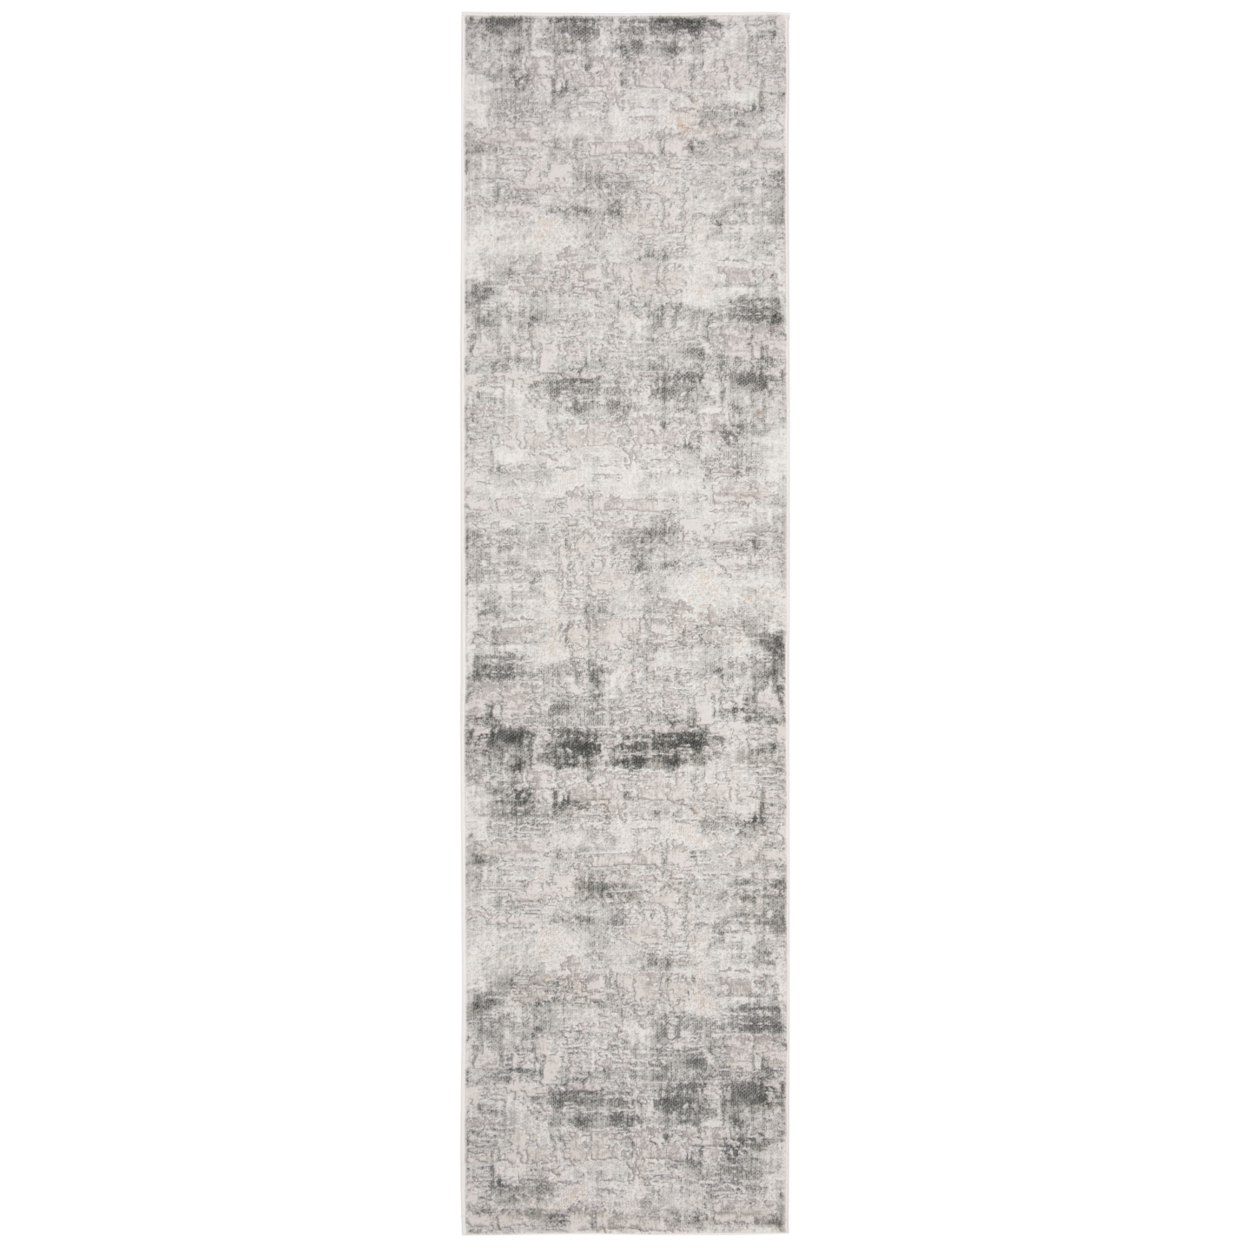 SAFAVIEH Vogue Collection VGE143A Beige / Charcoal Rug - 2' X 12'